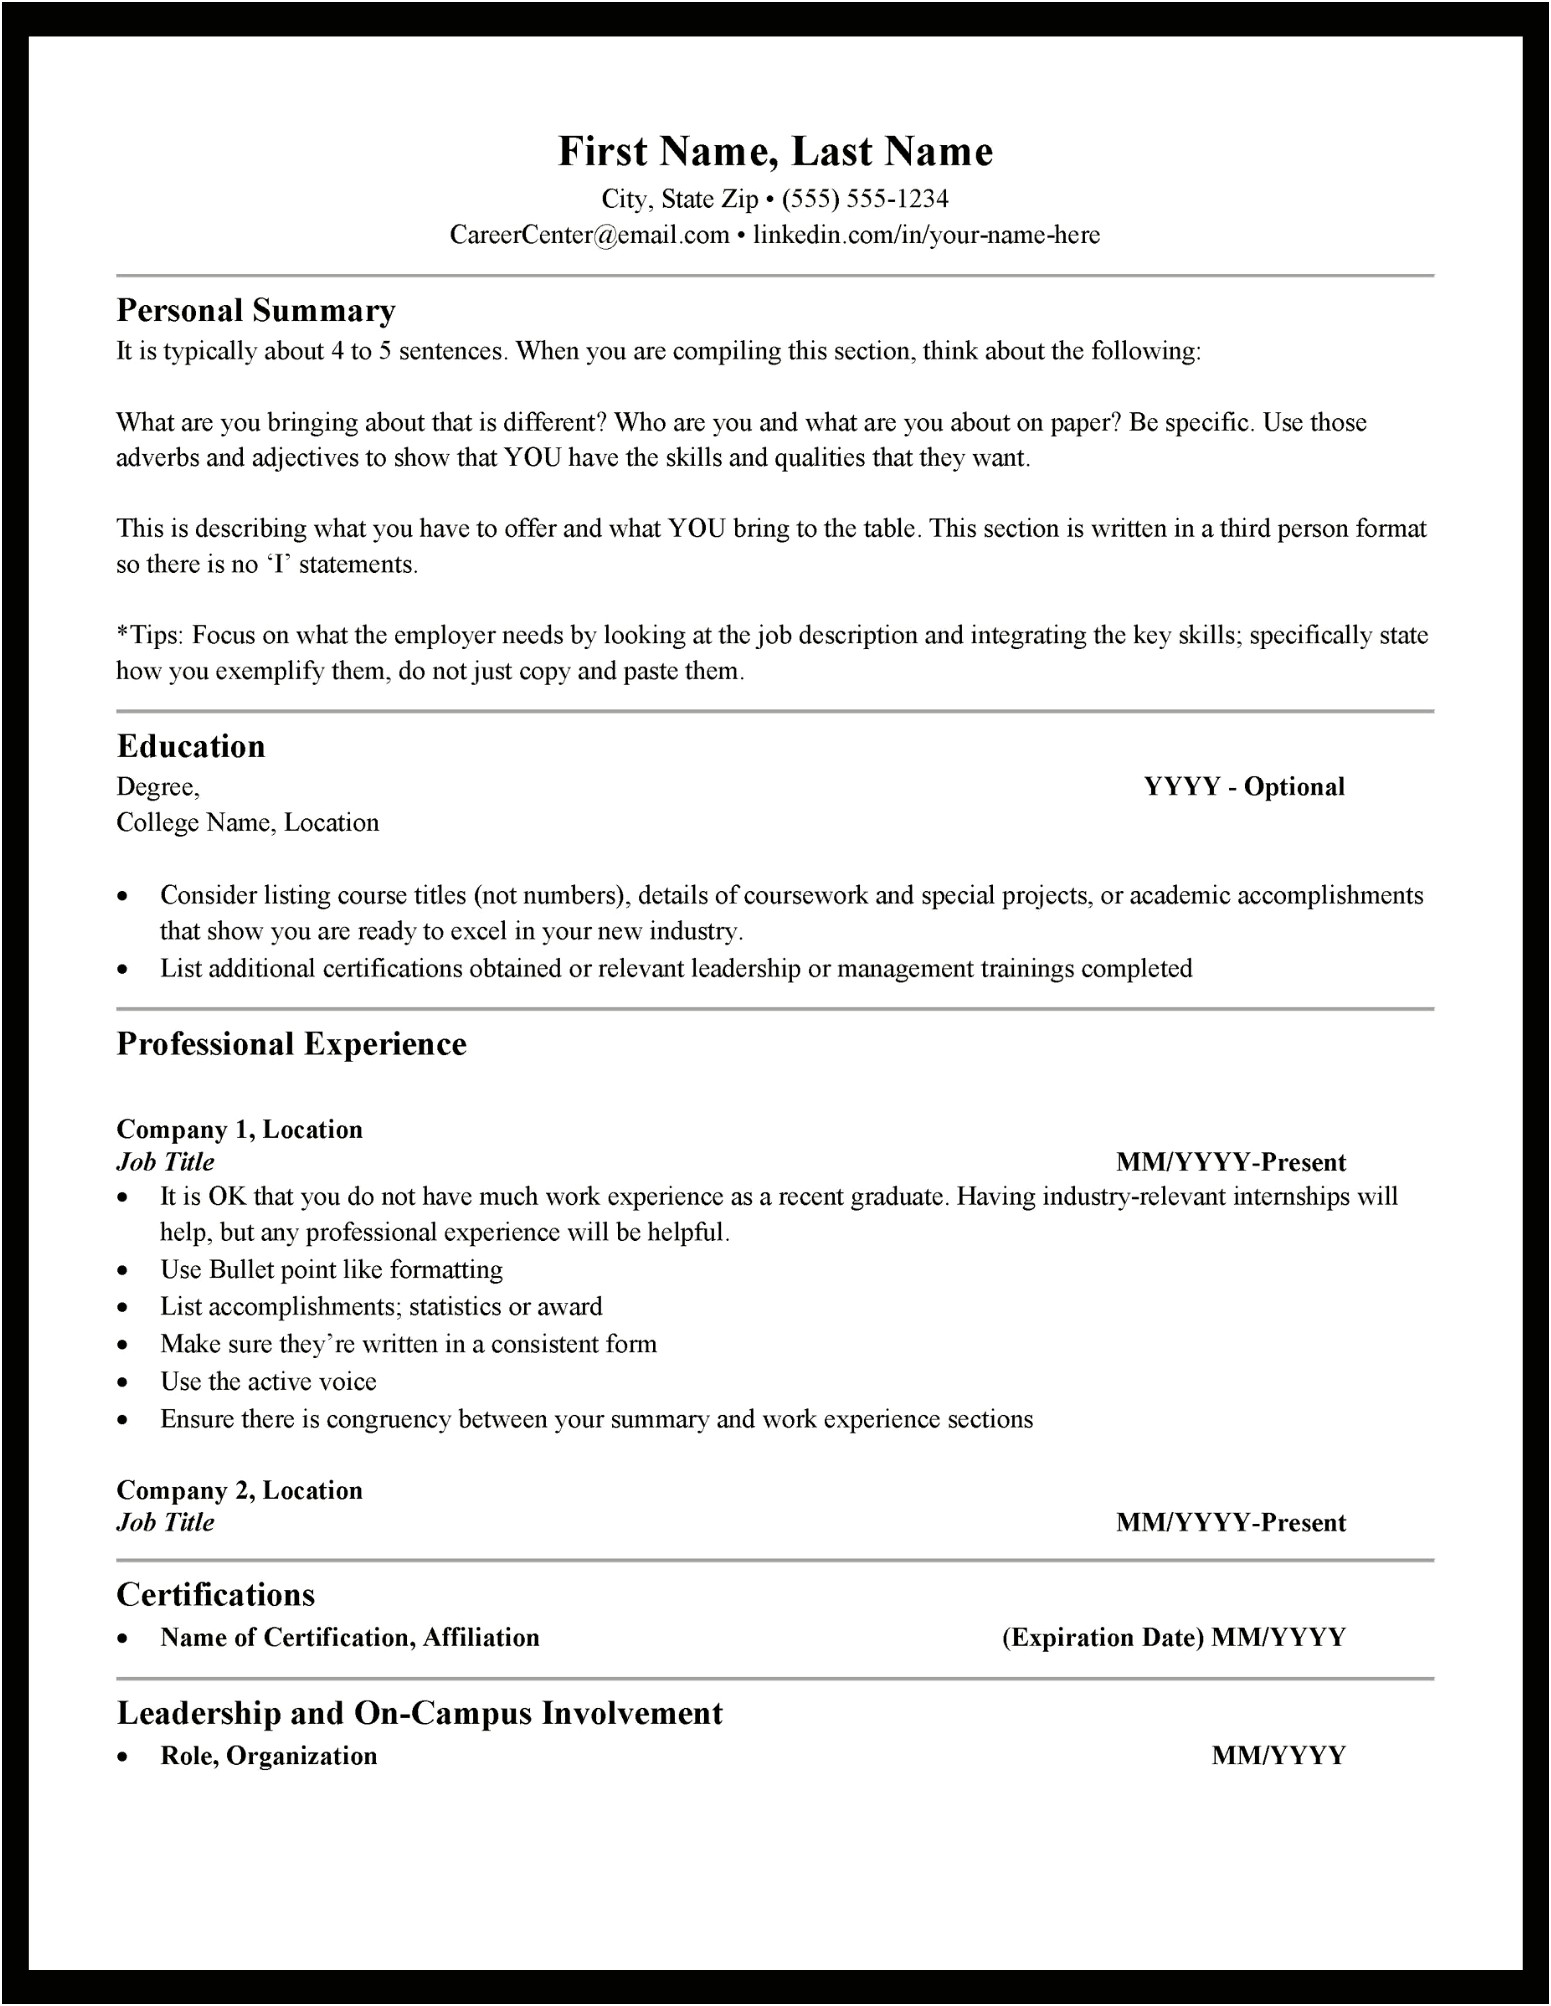 Listing Course Work On A Resume